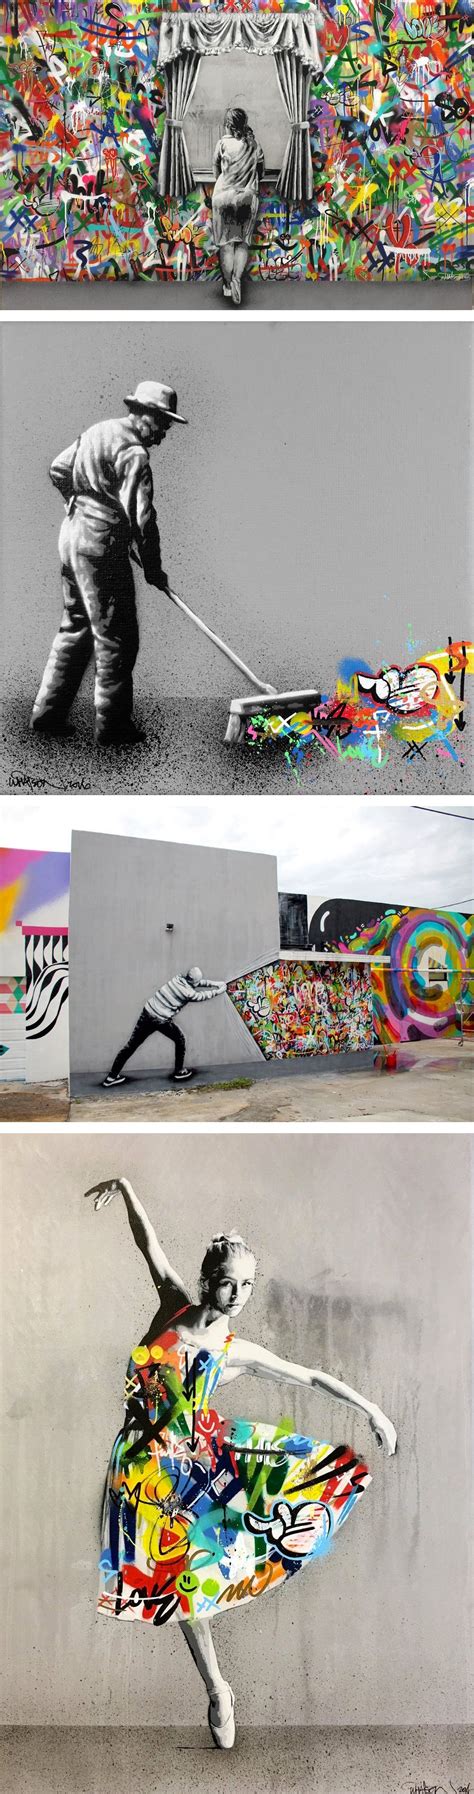 Stencil Art That Blends Graffiti And Decay By Martin Whatson Murals